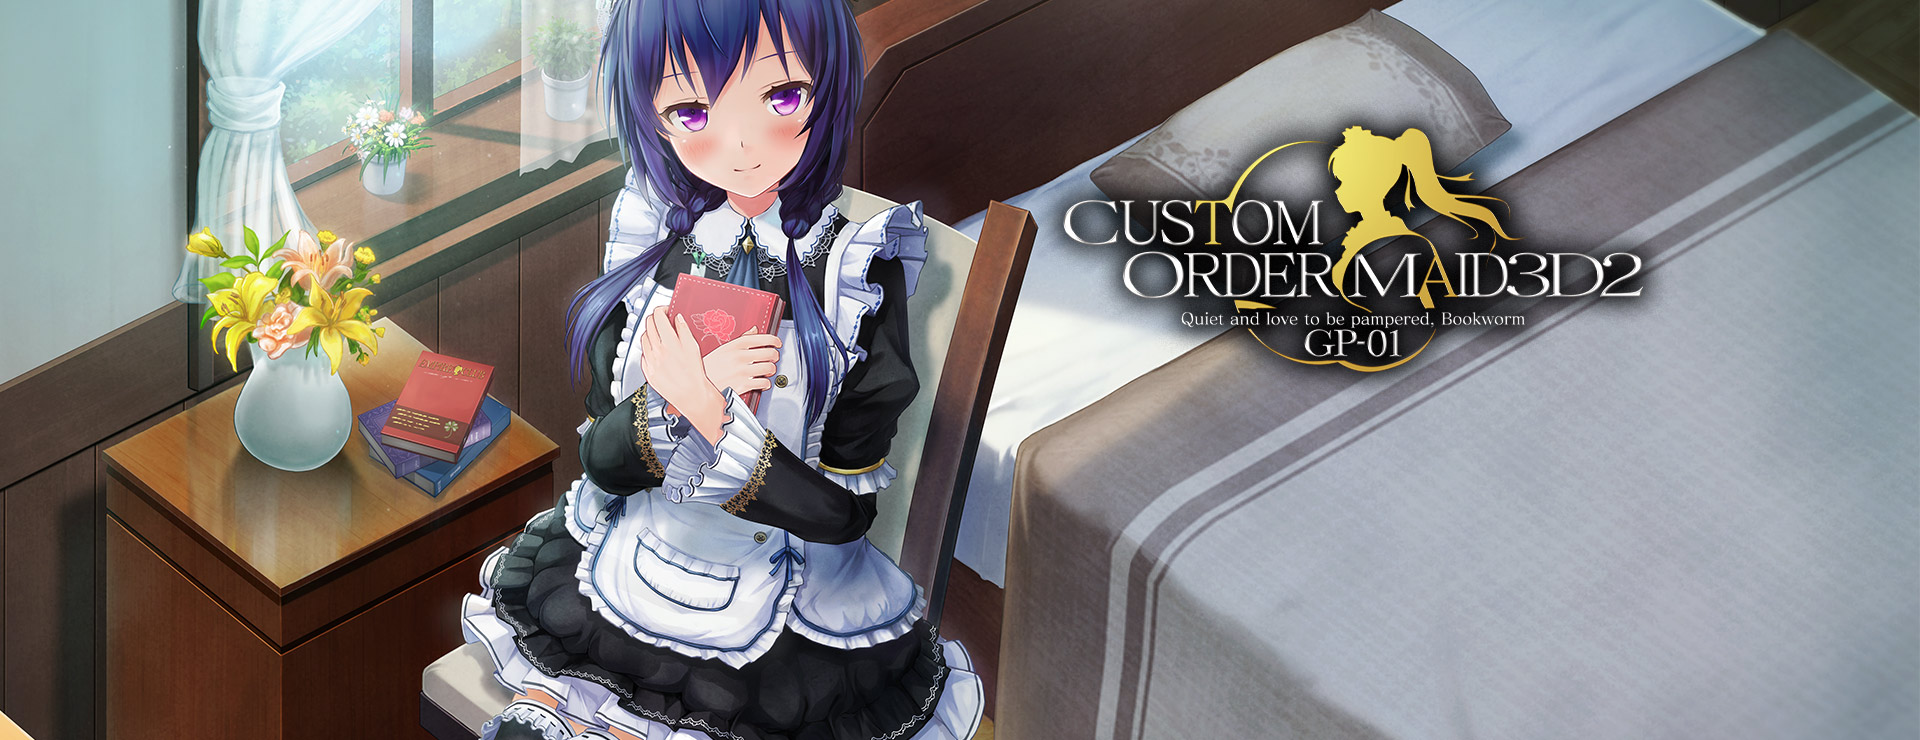 Custom Order Maid 3D2 - Quiet and love to be pampered Bookworm GP-01 DLC - Symulacja Gra